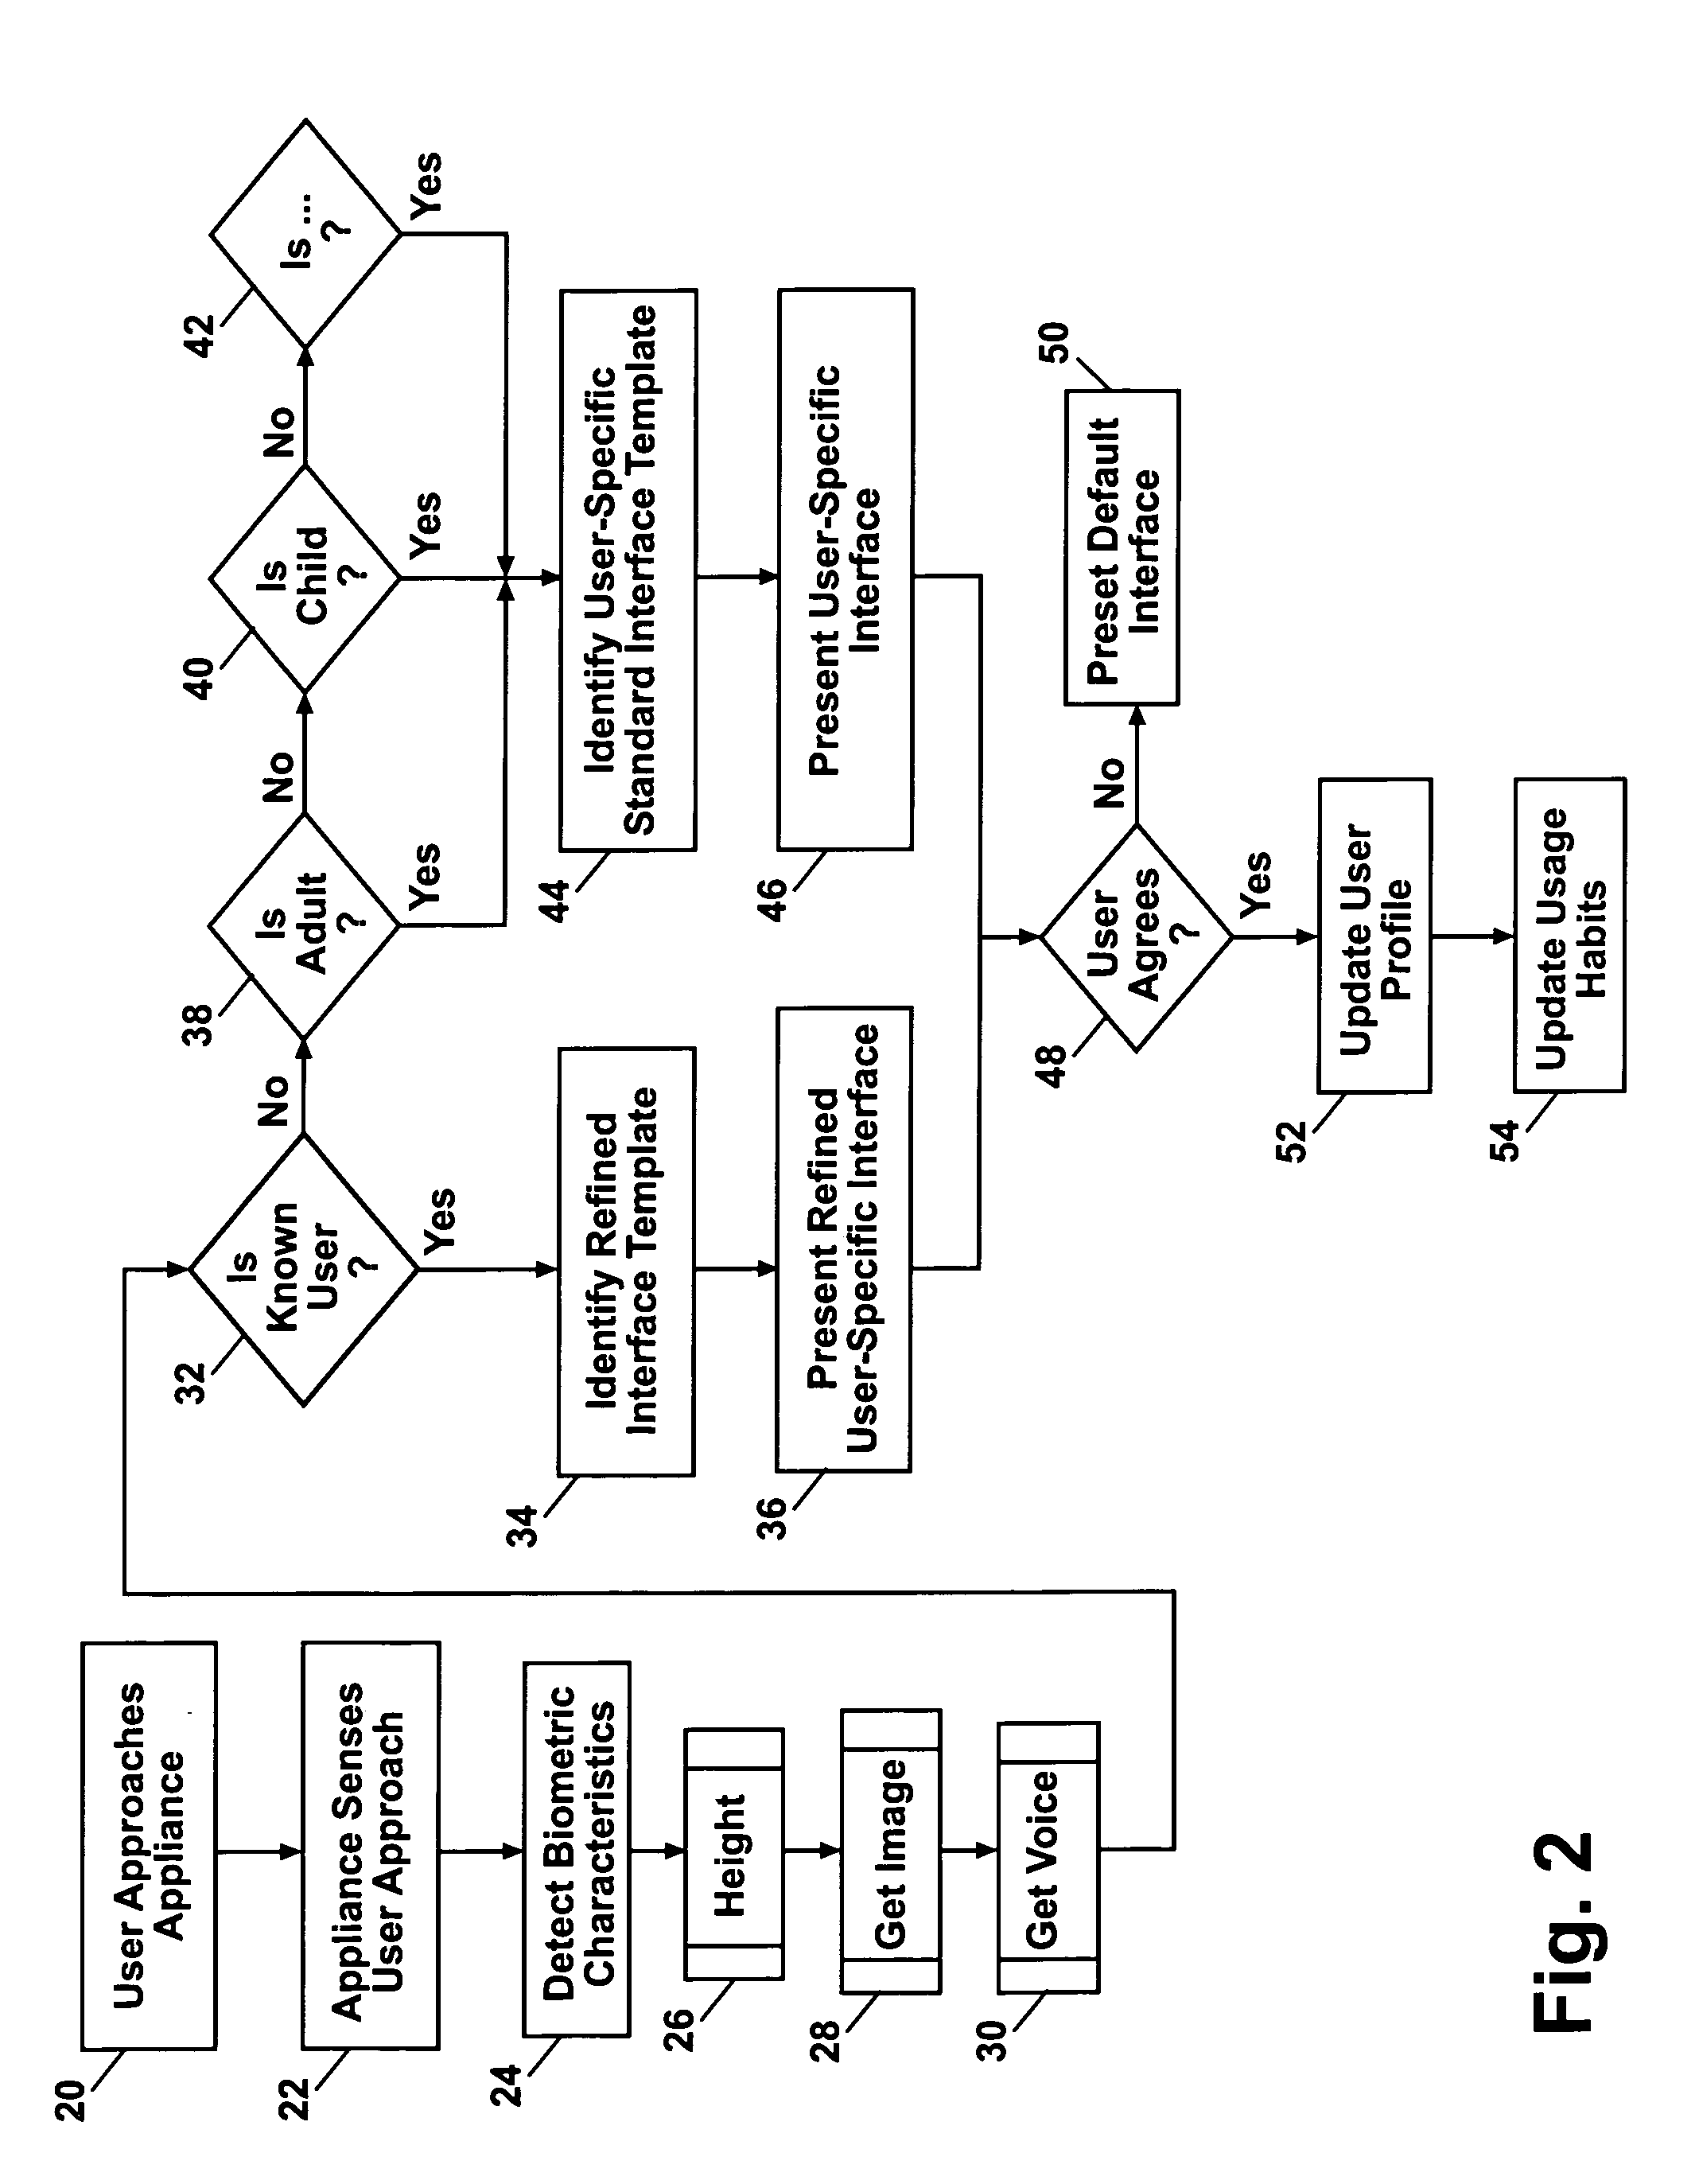 Method for personalizing an appliance user interface